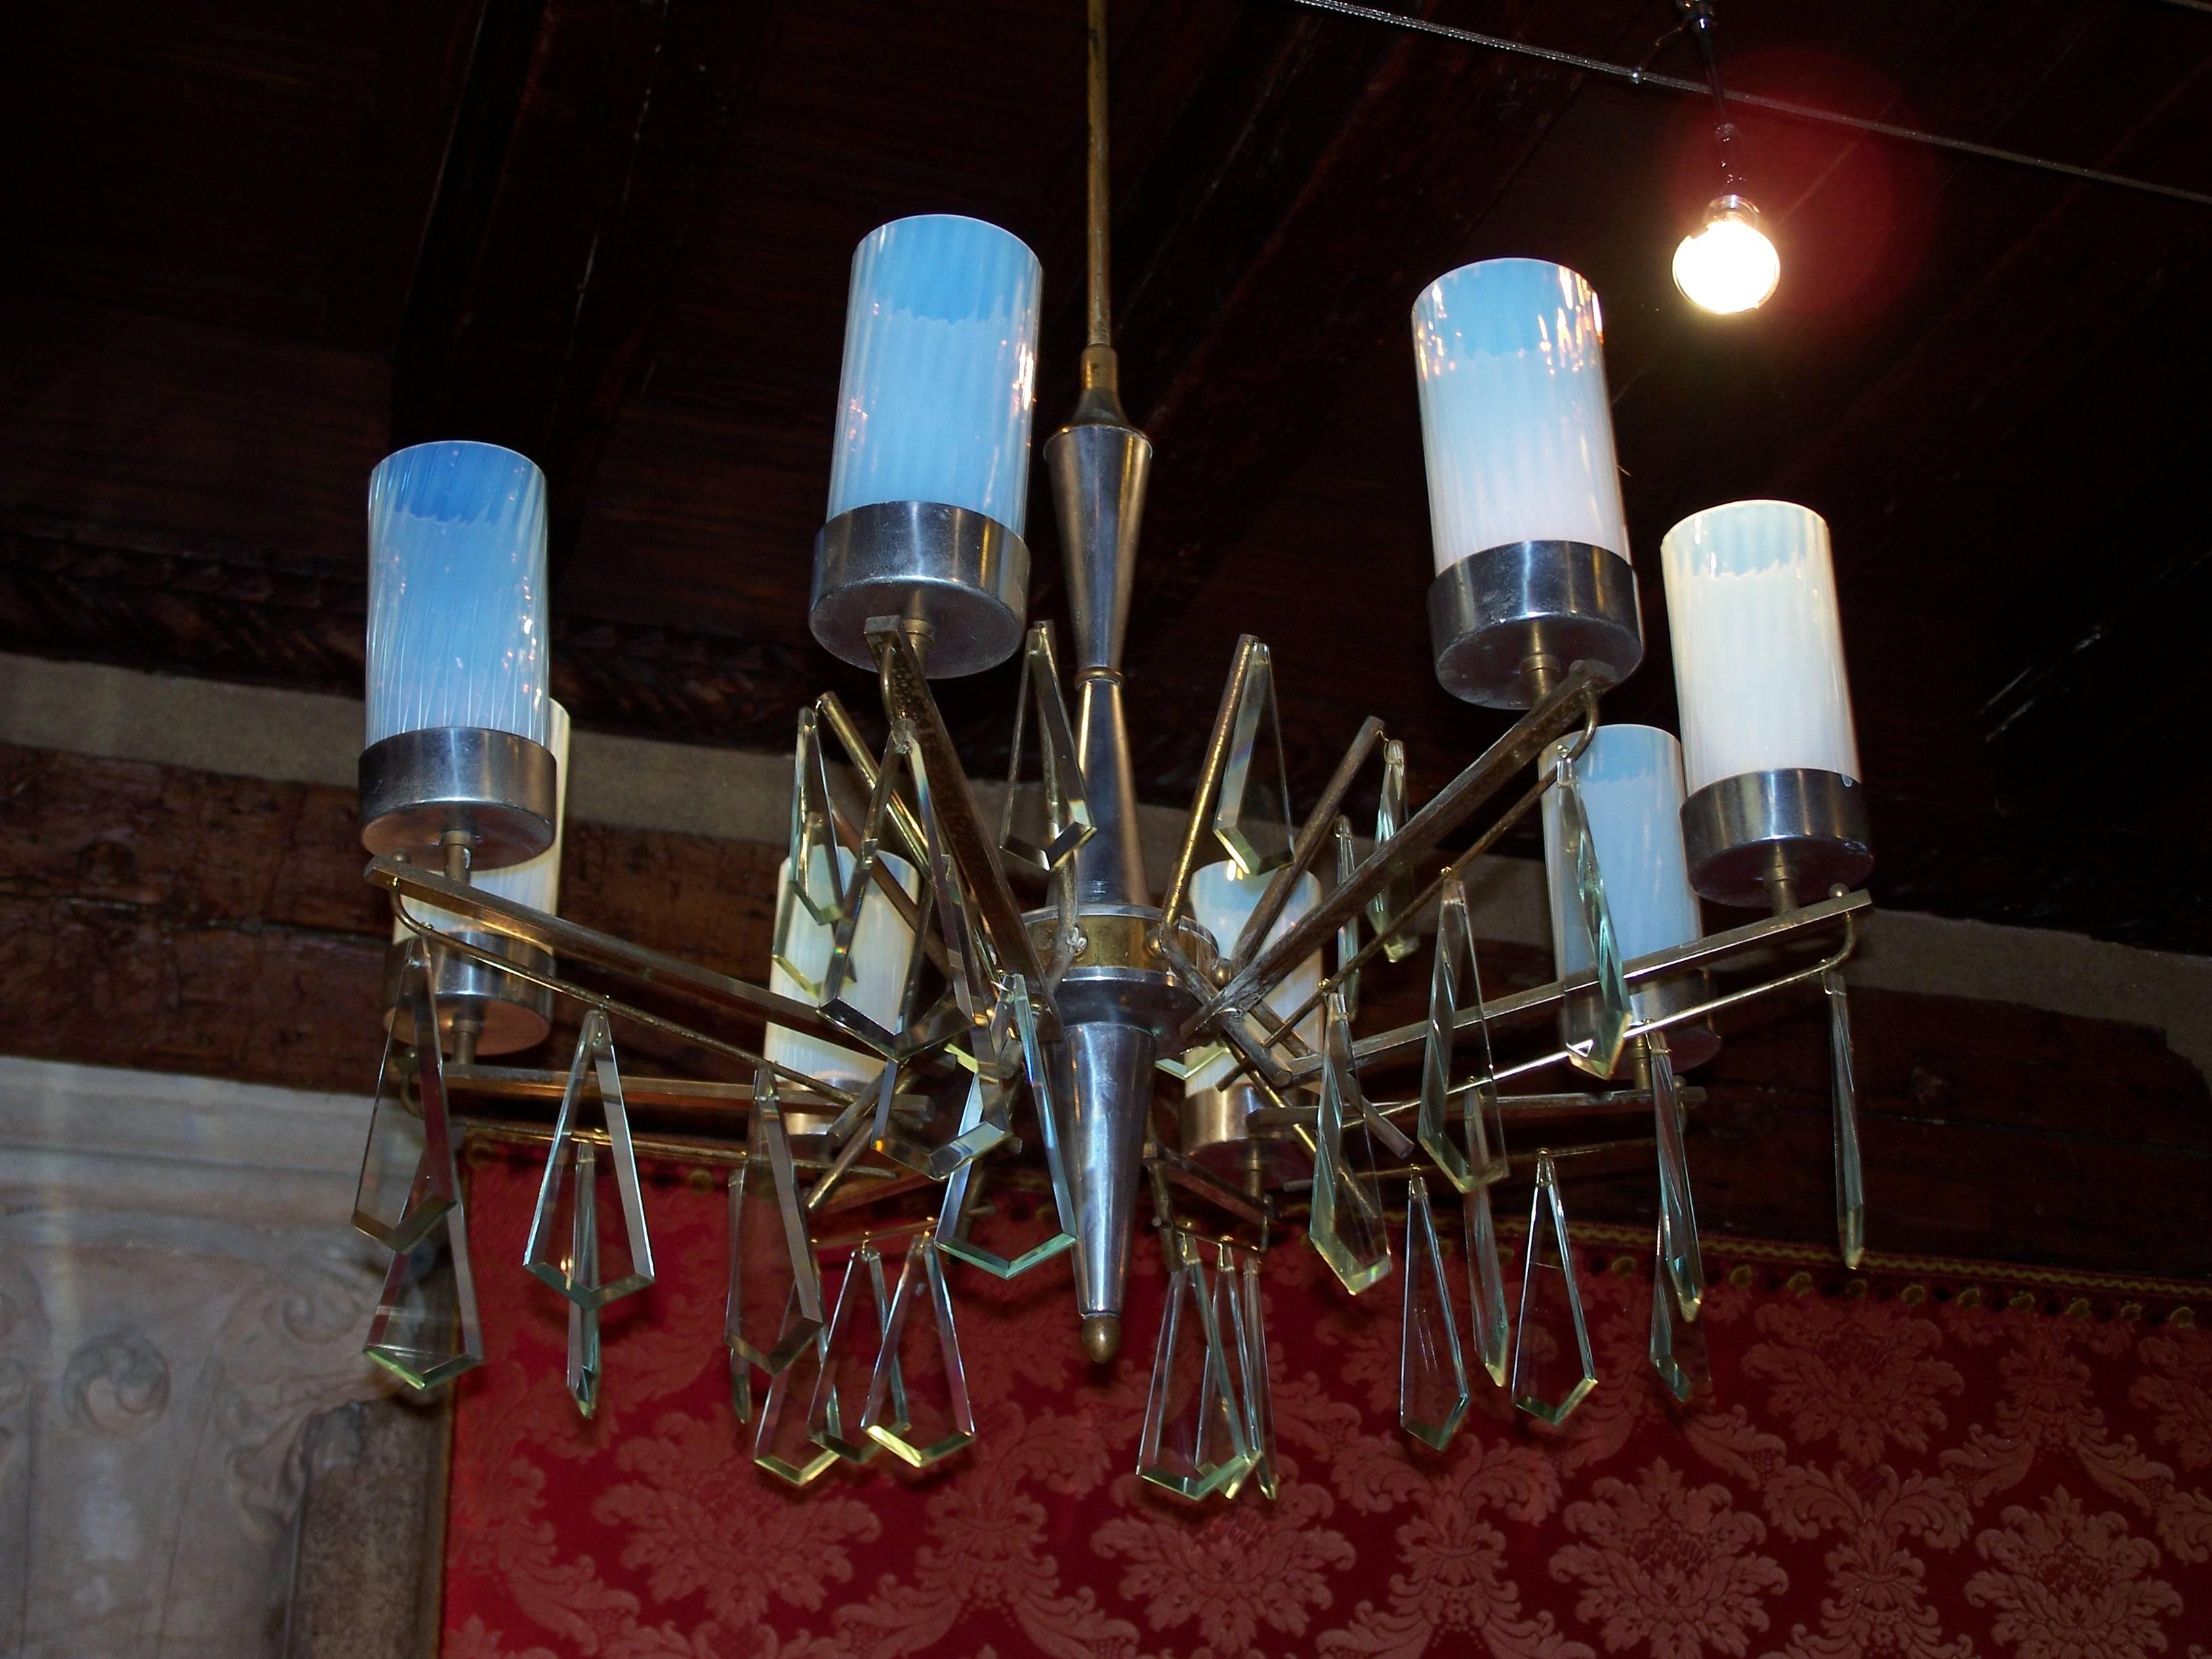 Vintage eight-arm chandelier with opal glass lampshade, chromium-plated aluminium and brass stem with cut glass pendant.